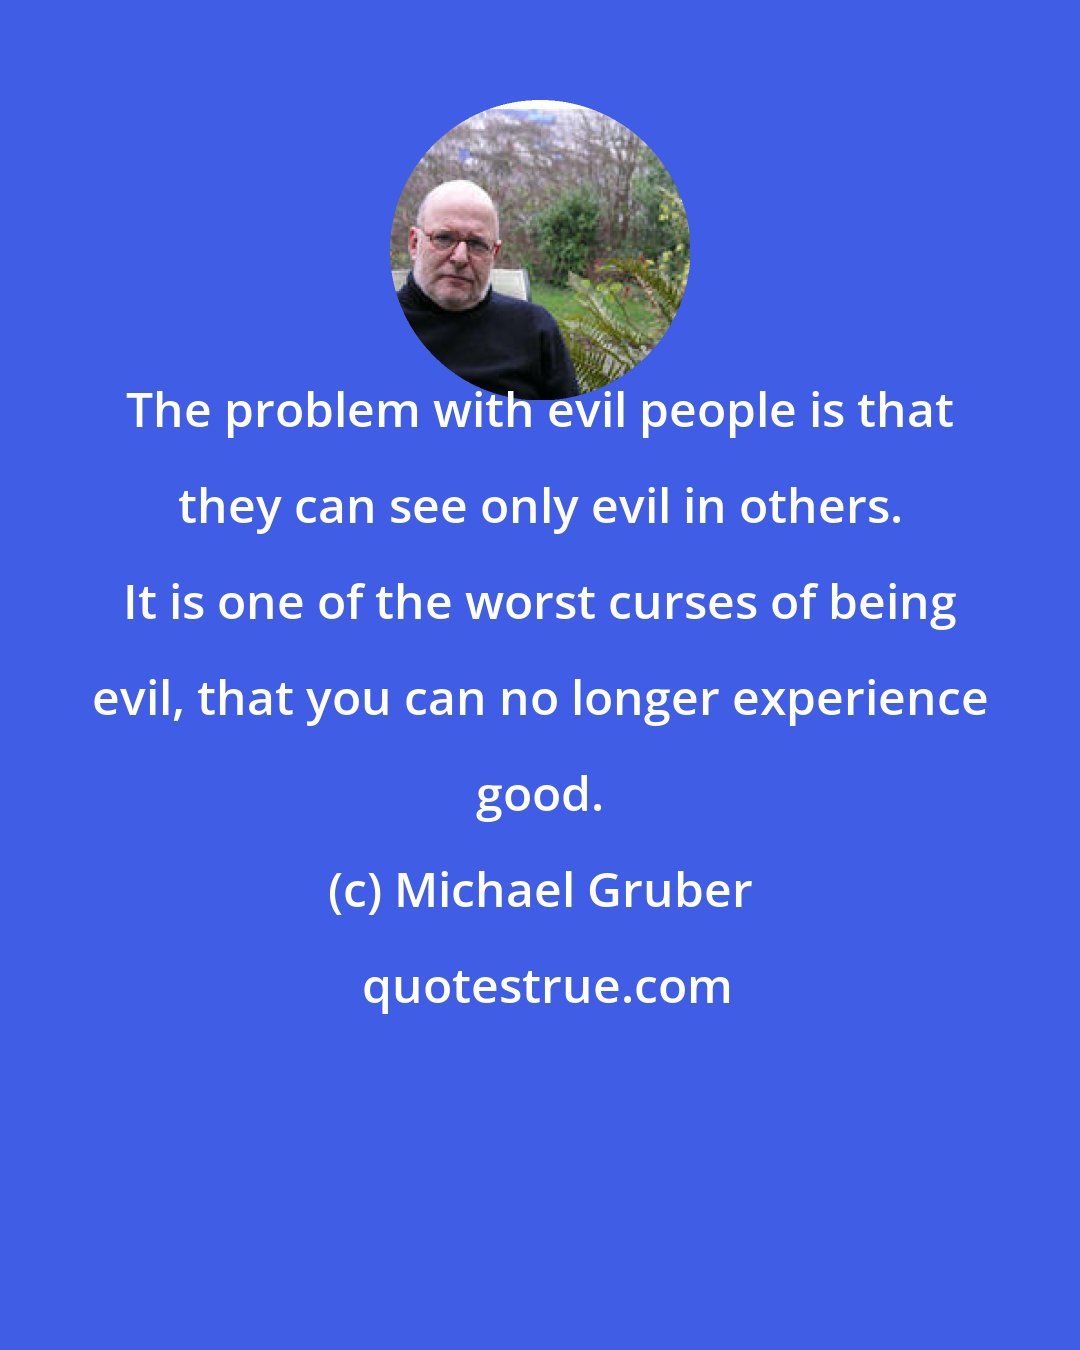 Michael Gruber: The problem with evil people is that they can see only evil in others. It is one of the worst curses of being evil, that you can no longer experience good.